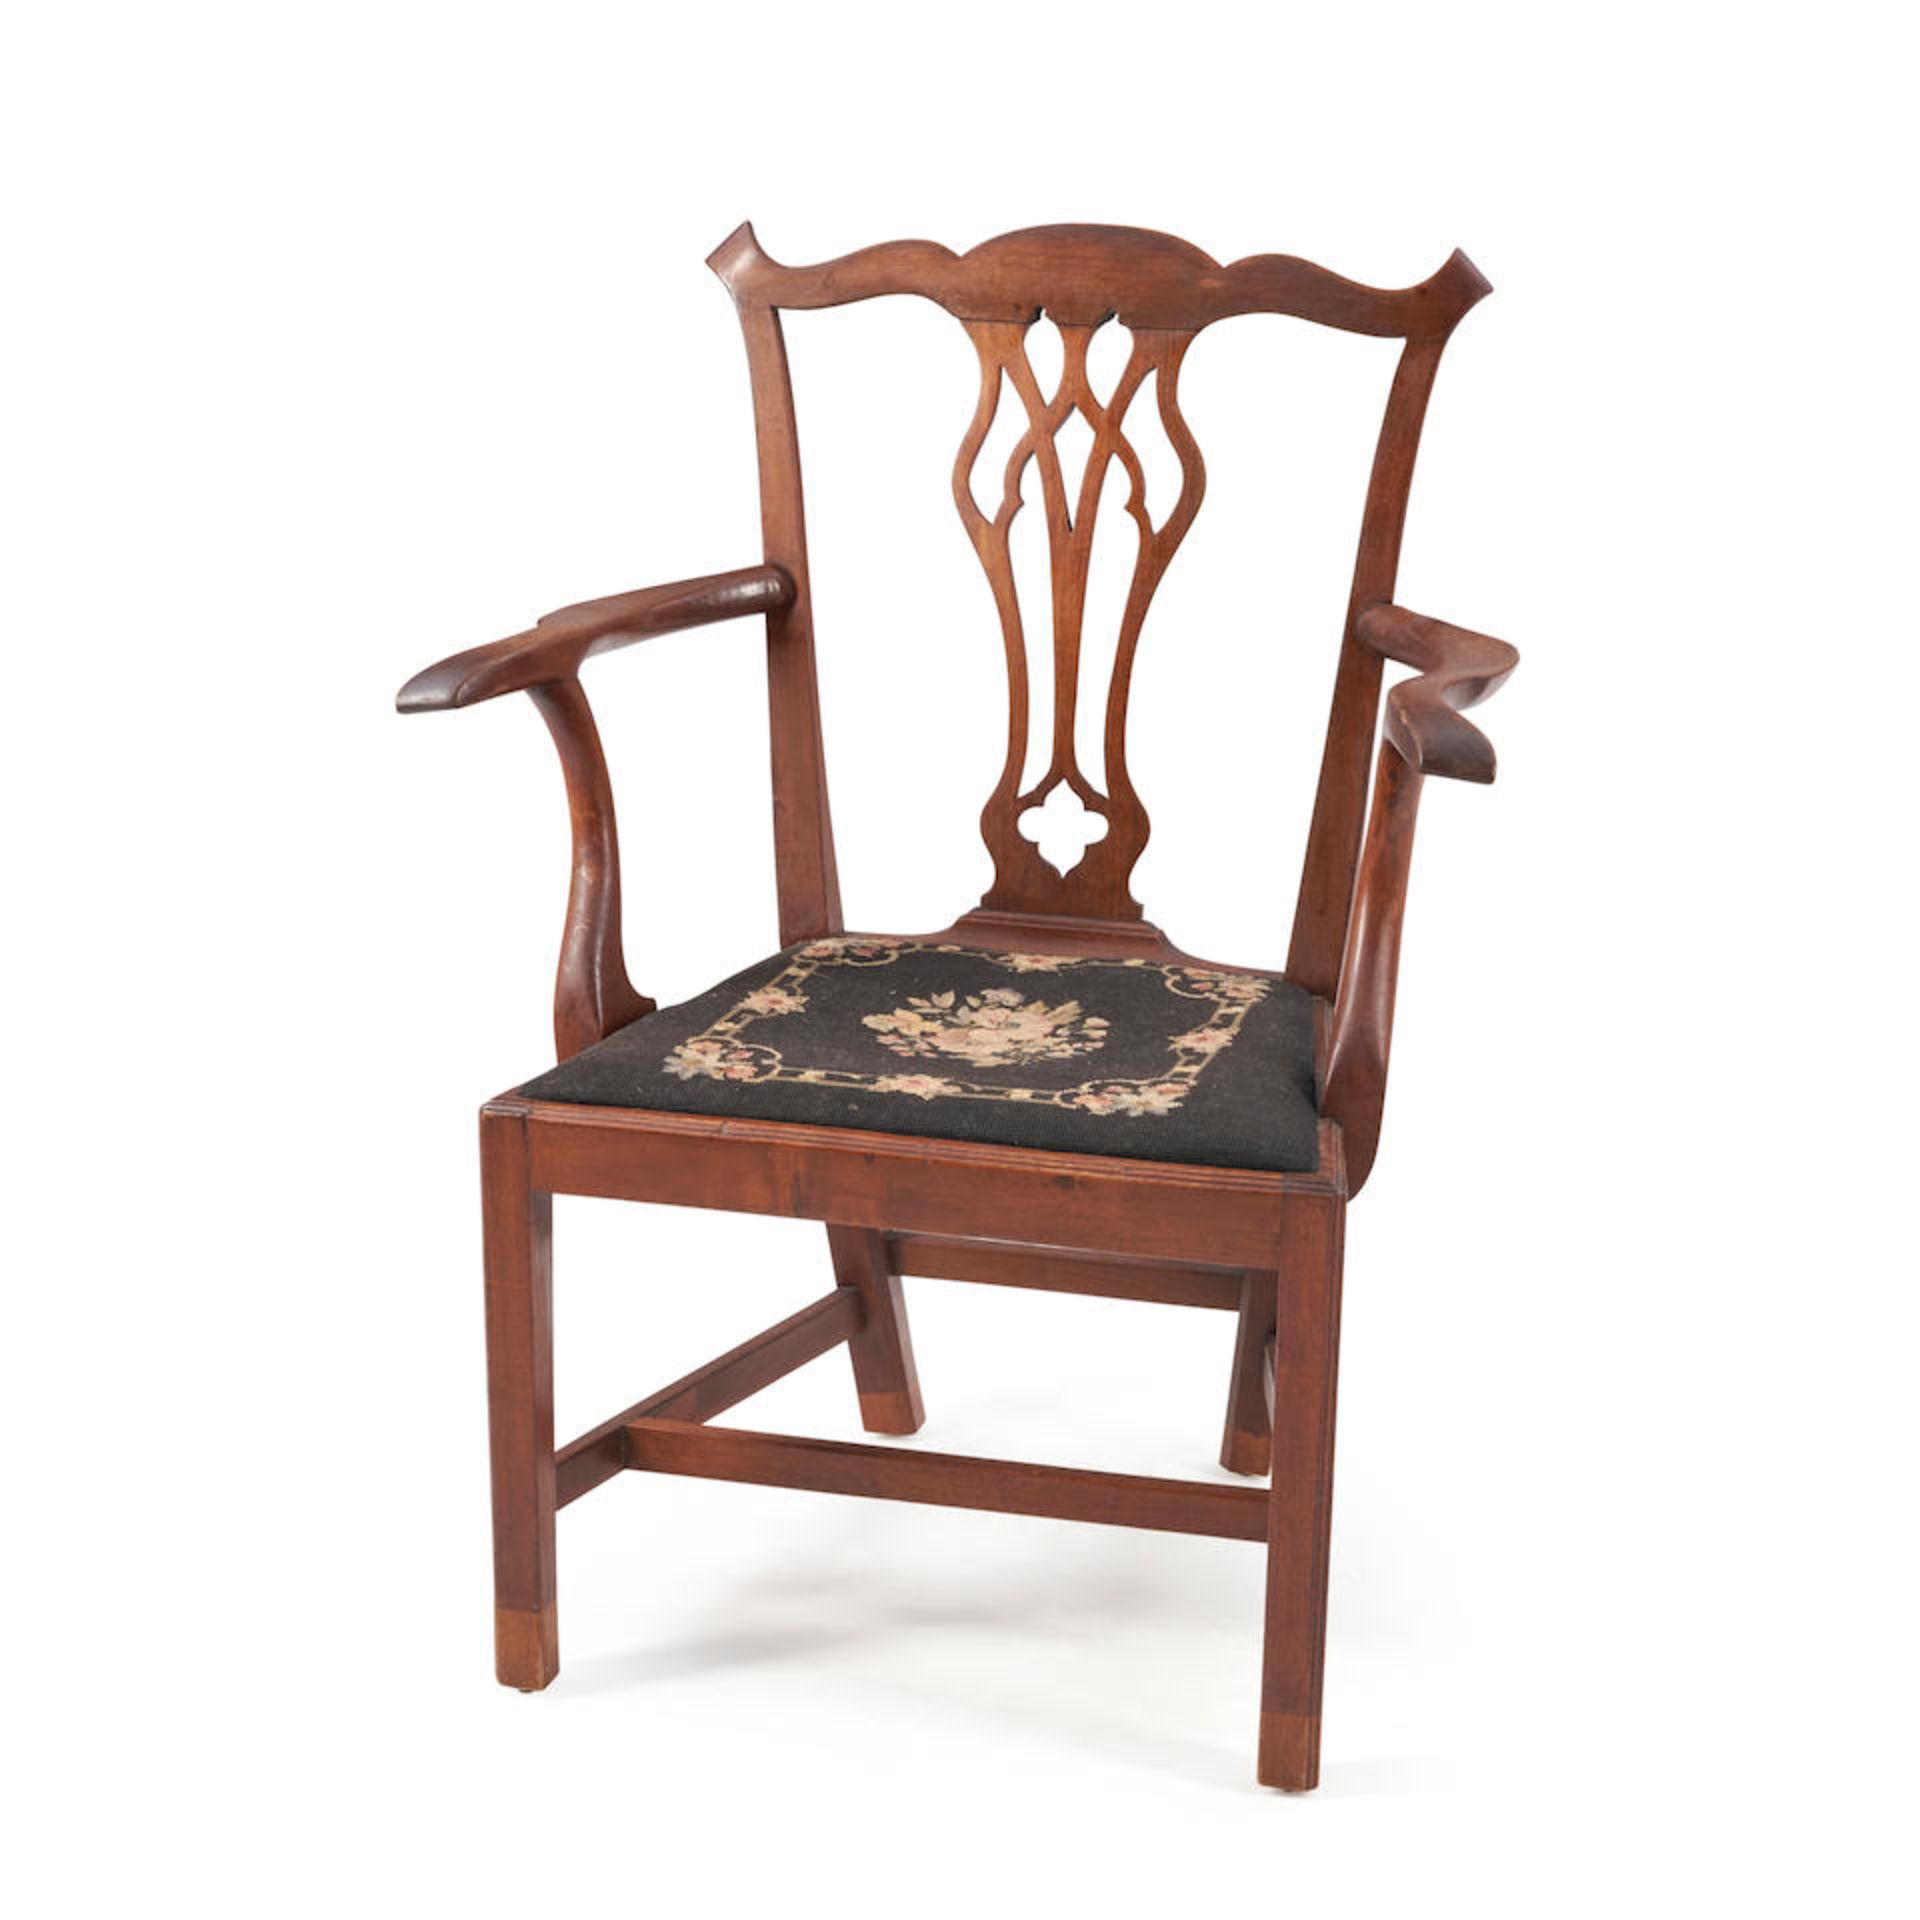 Chippendale-style Walnut Armchair, America or Europe, 19th century or later.